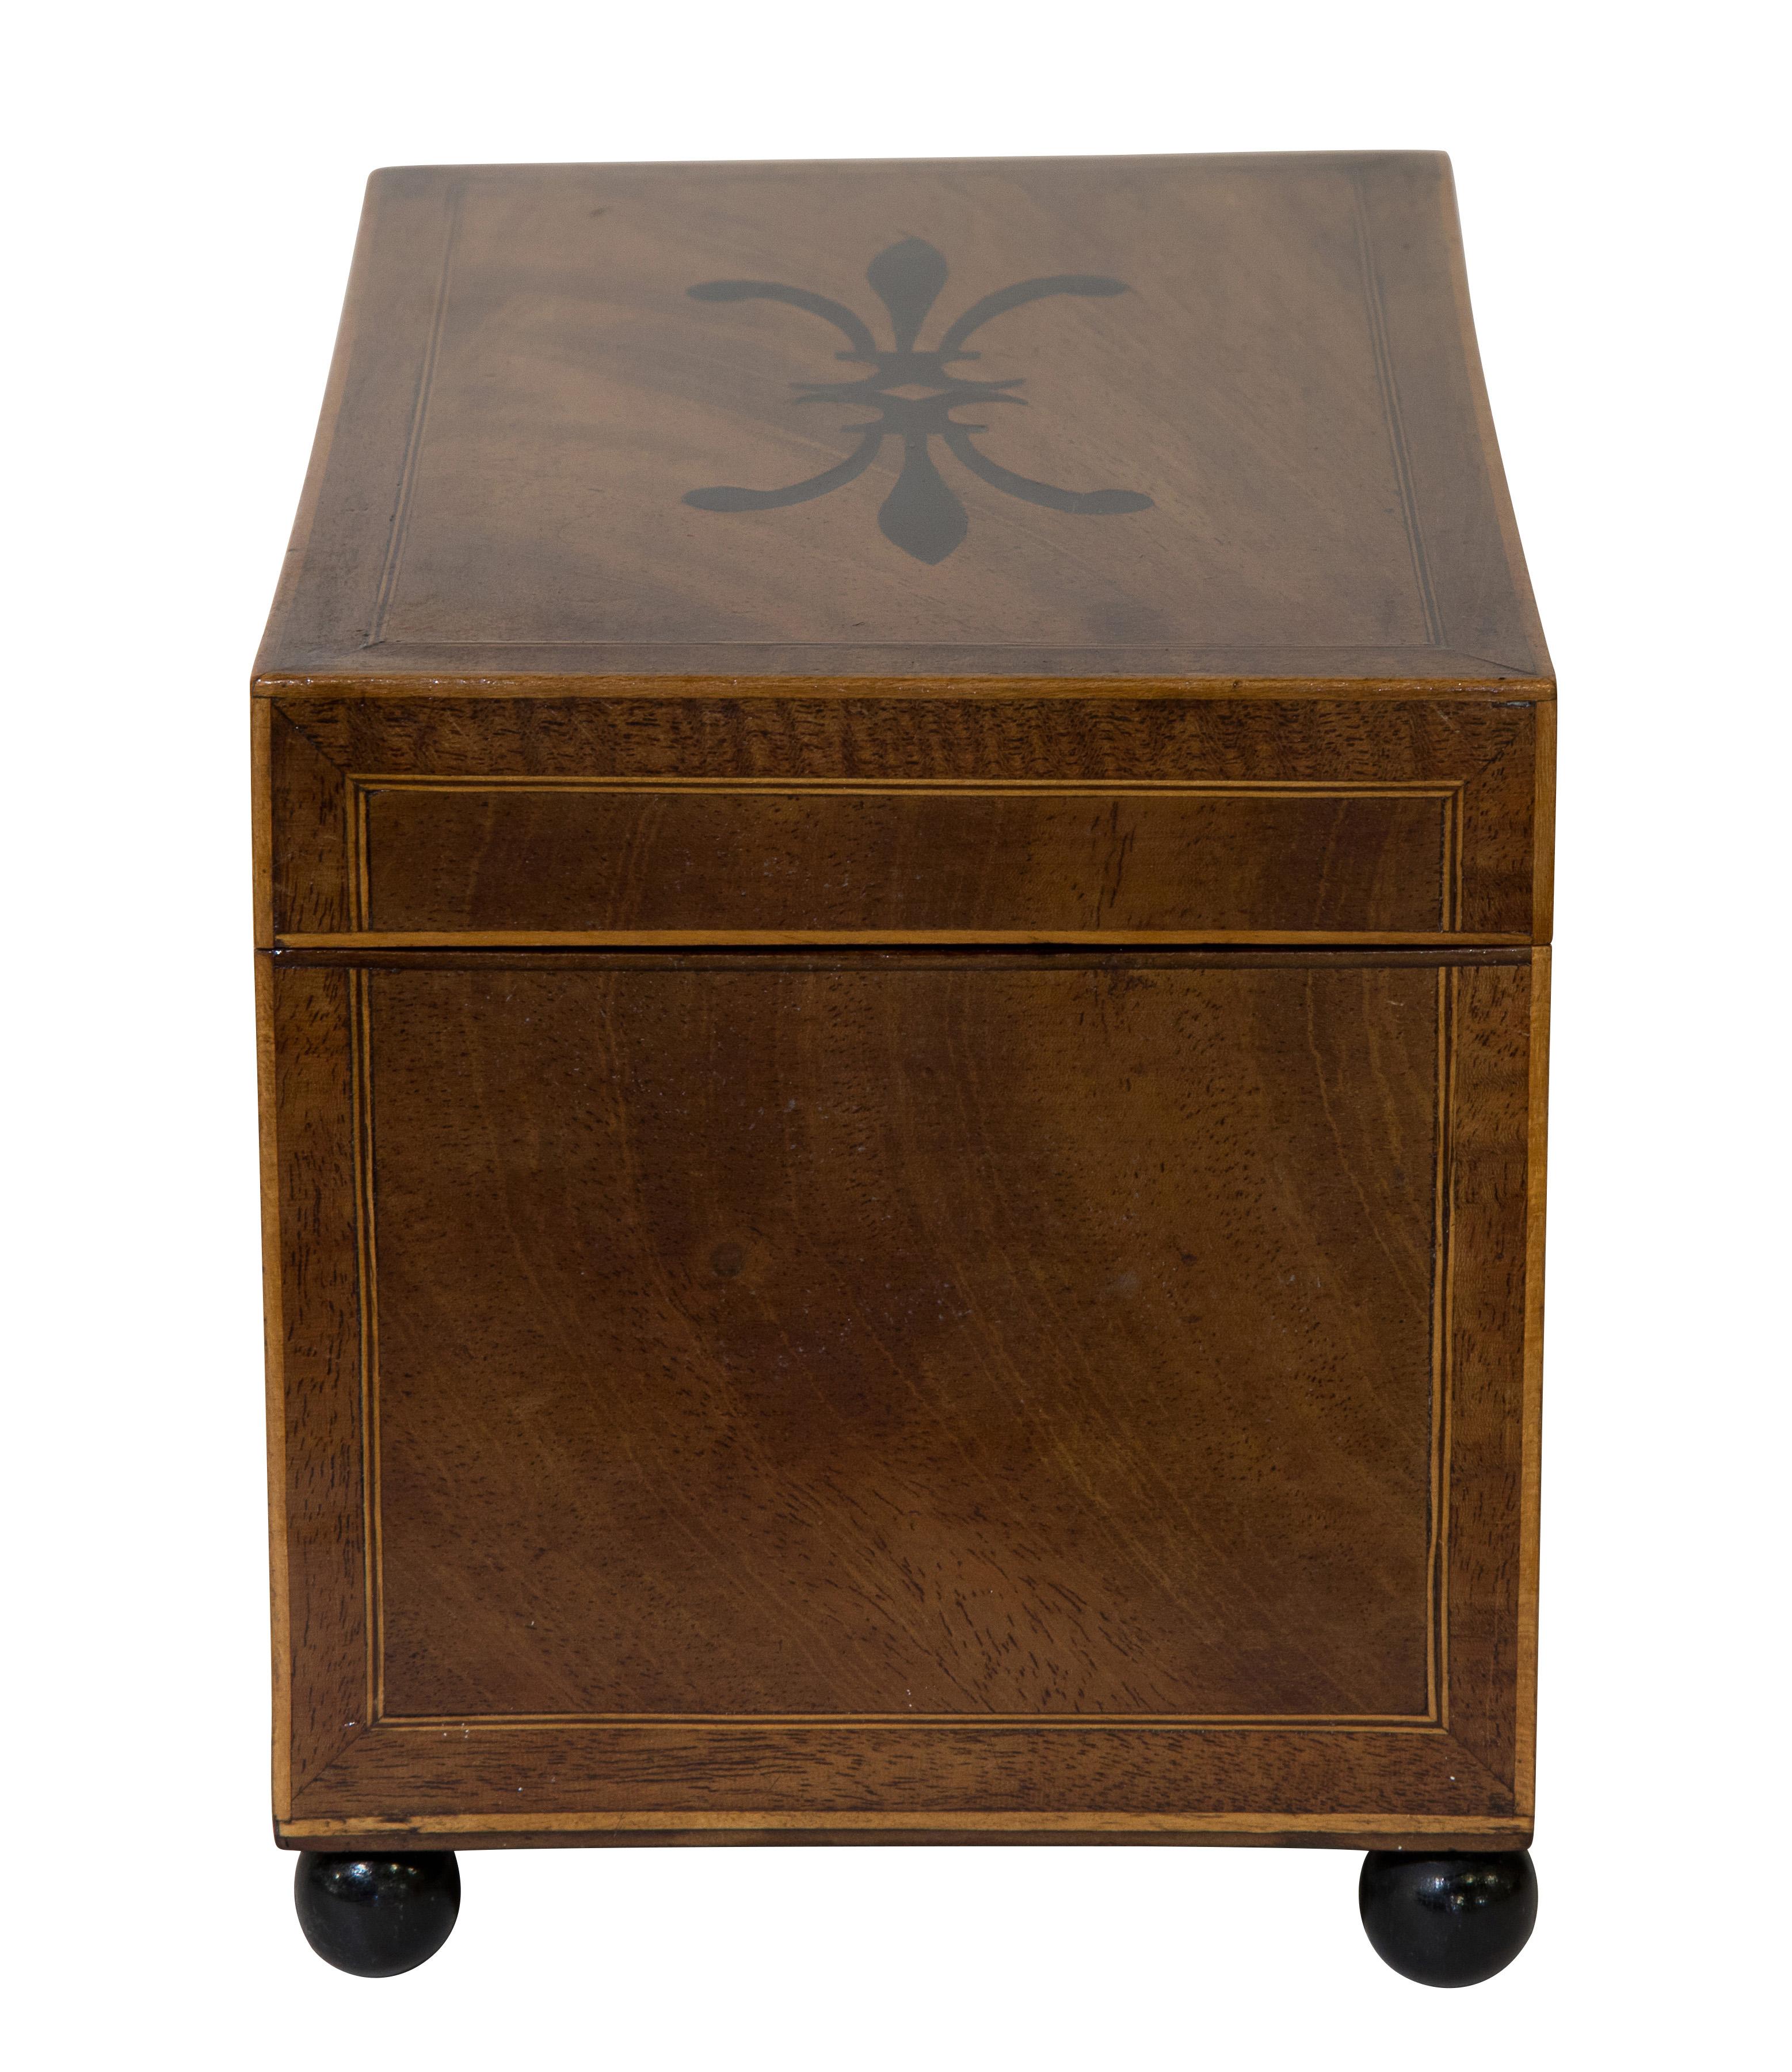 George III mahogany inlaid tea caddy on bun feet. (Provenance - from the estate of the late Lady Dodds).